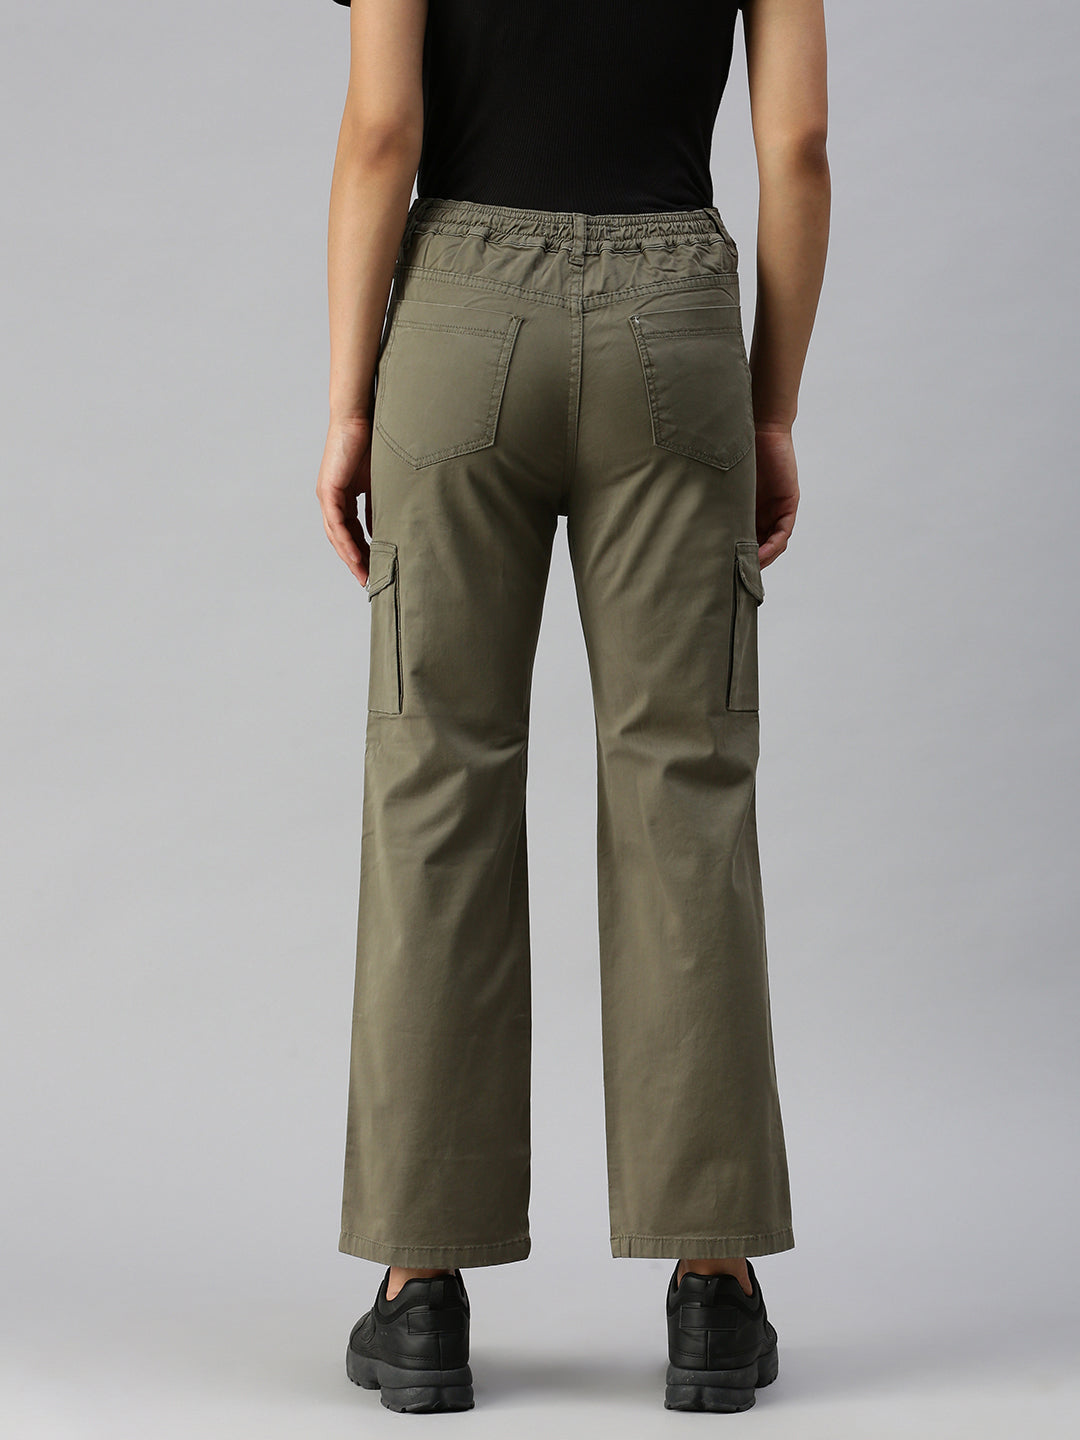 Women's Olive Solid Denim Straight Jeans